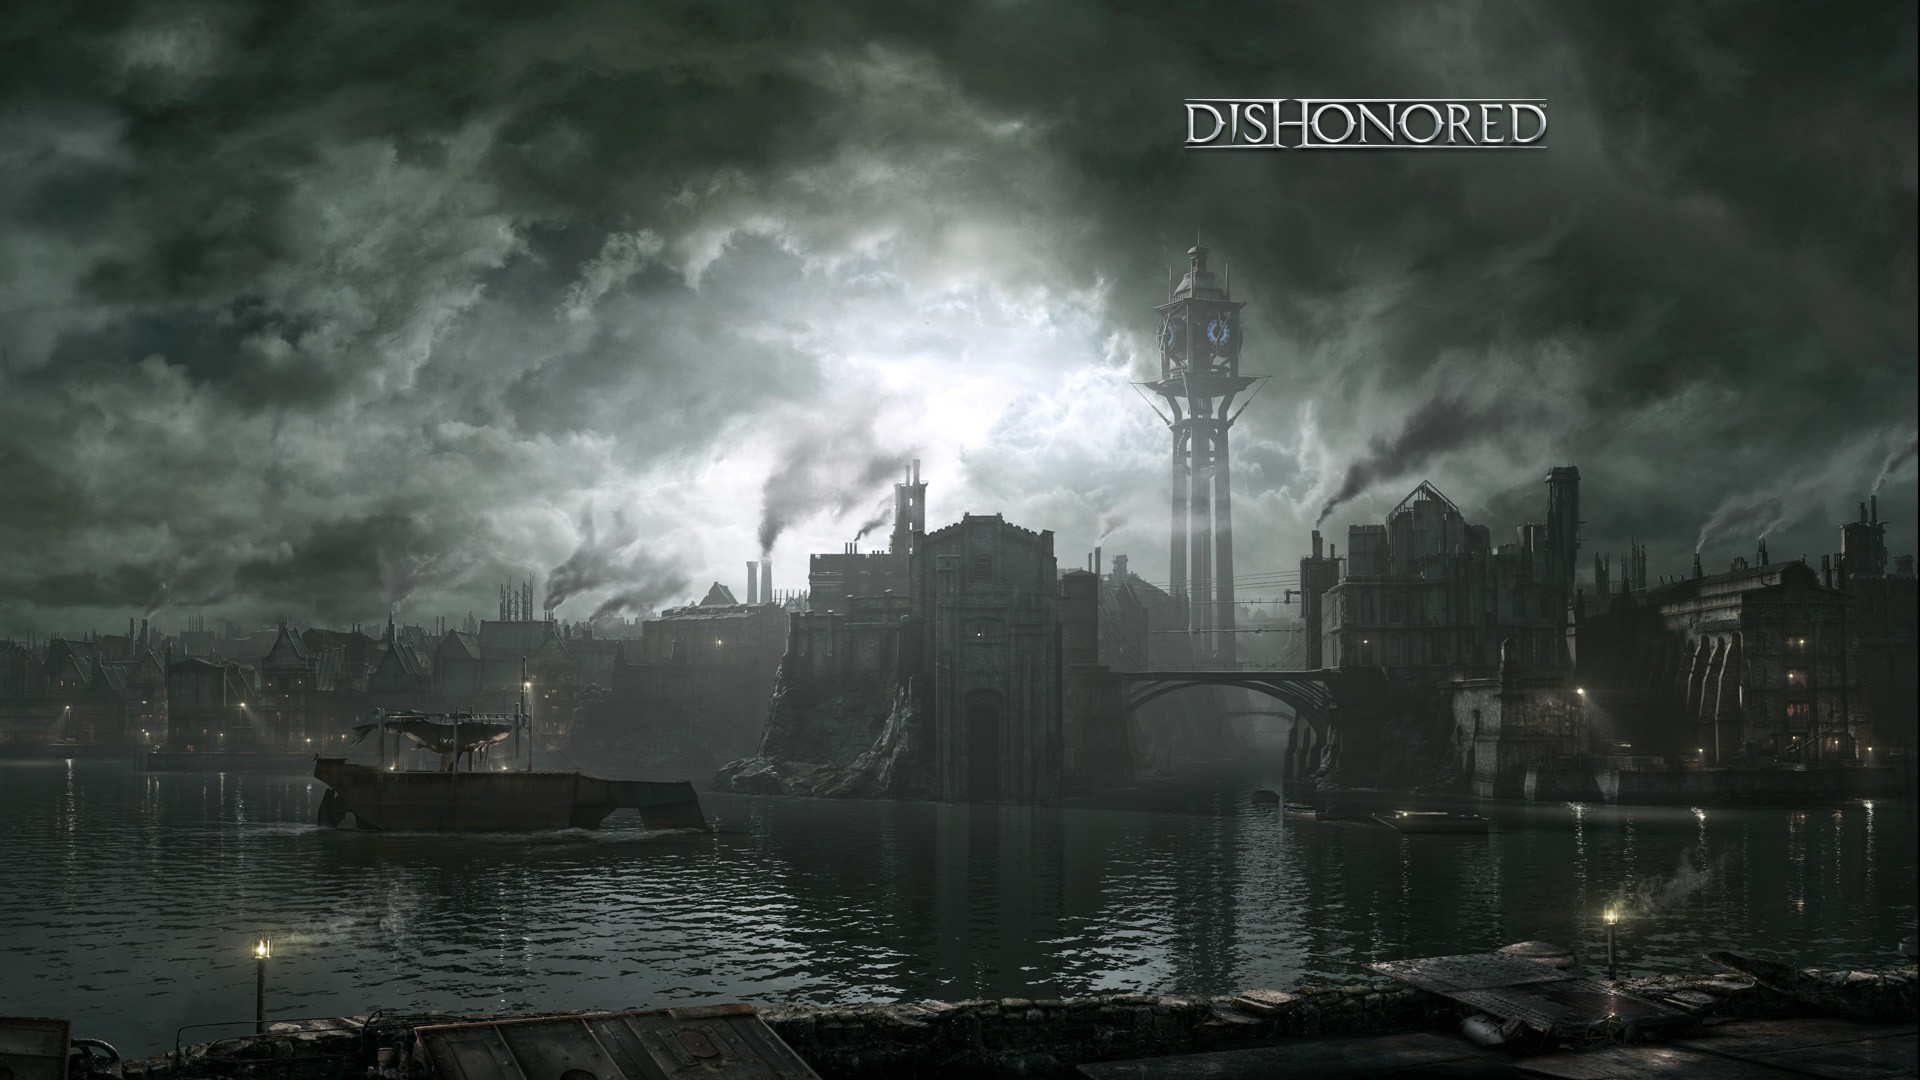 1920x1080 Playstation 3 dishonored ps3 wallpaper